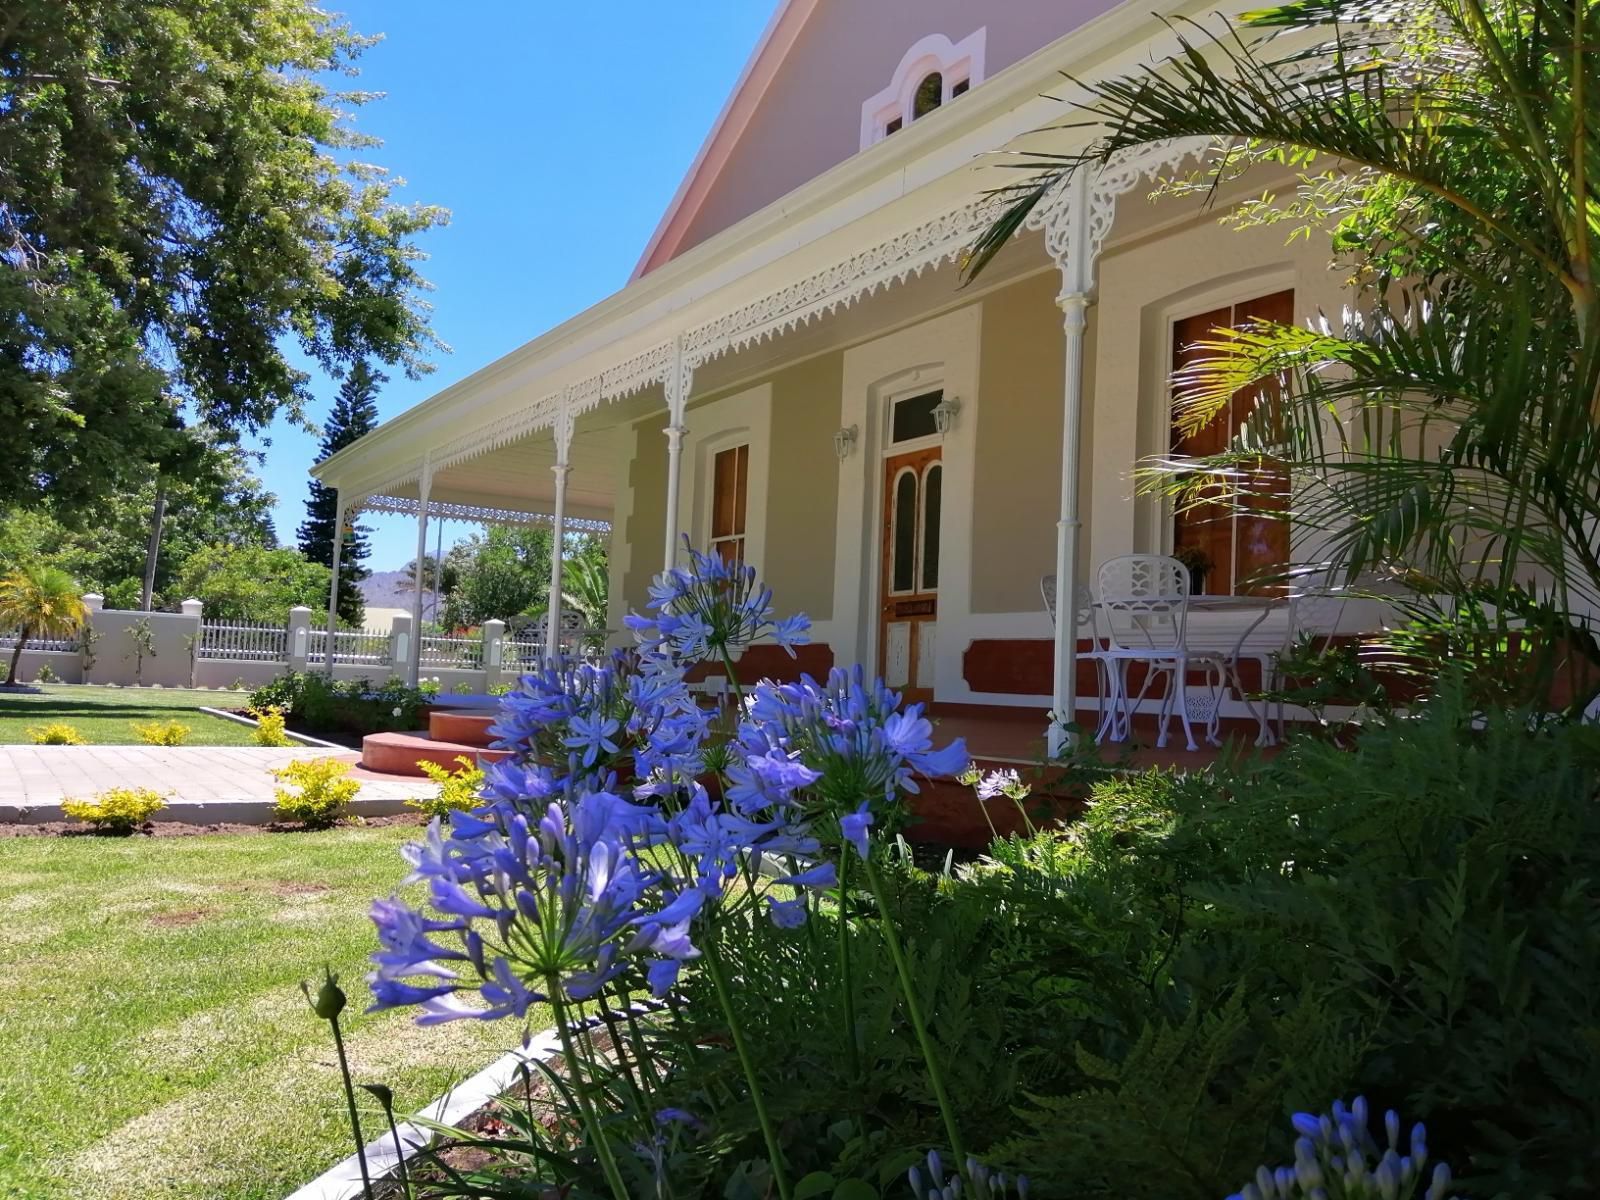 Monte Rosa Guesthouse Rawsonville Western Cape South Africa House, Building, Architecture